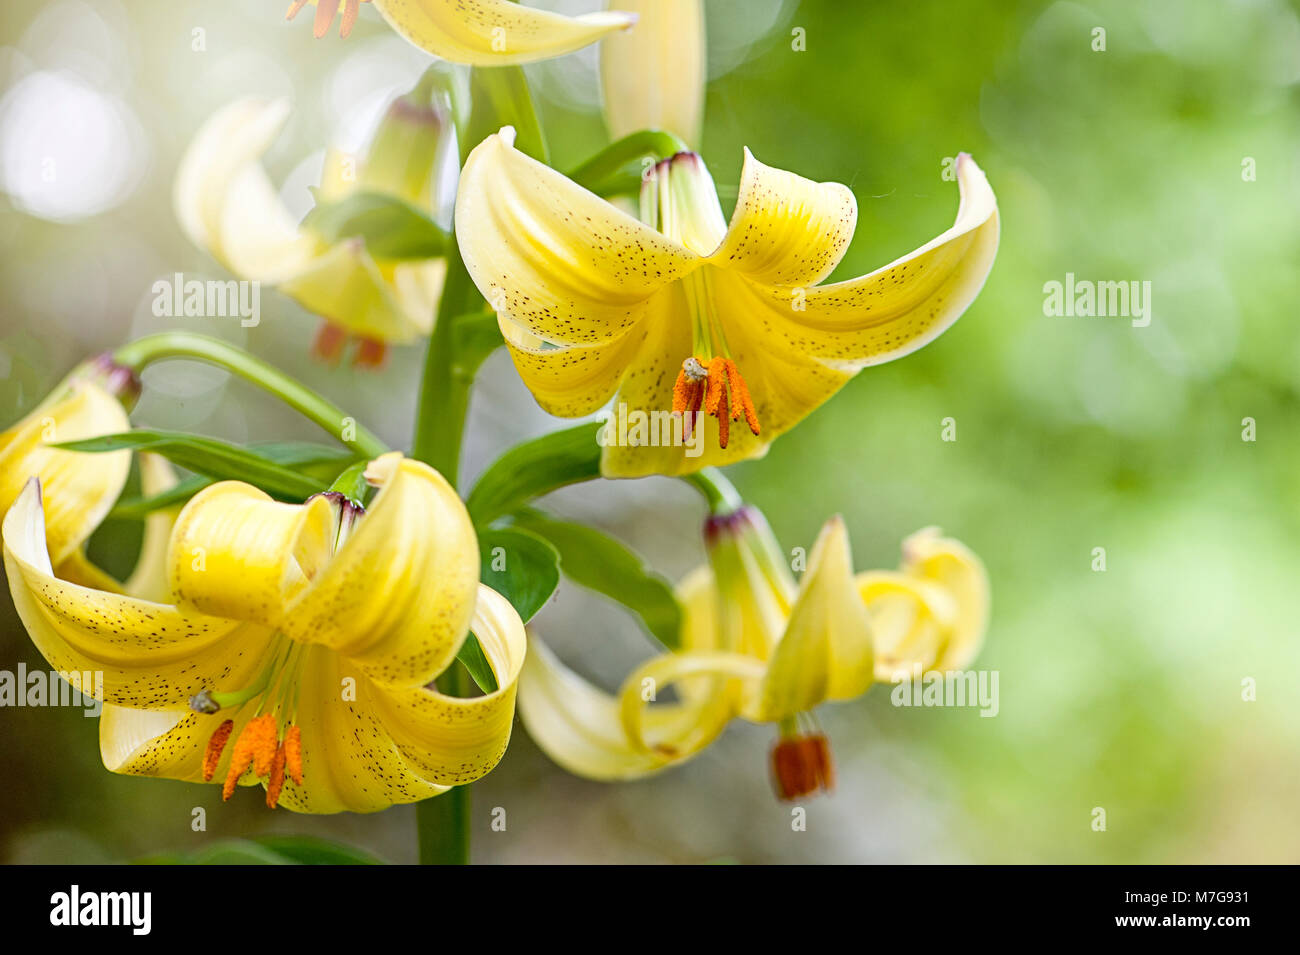 Close up image of the summer flowering, yellow Martagon Lily also known as the Turk's Cap Lily Stock Photo